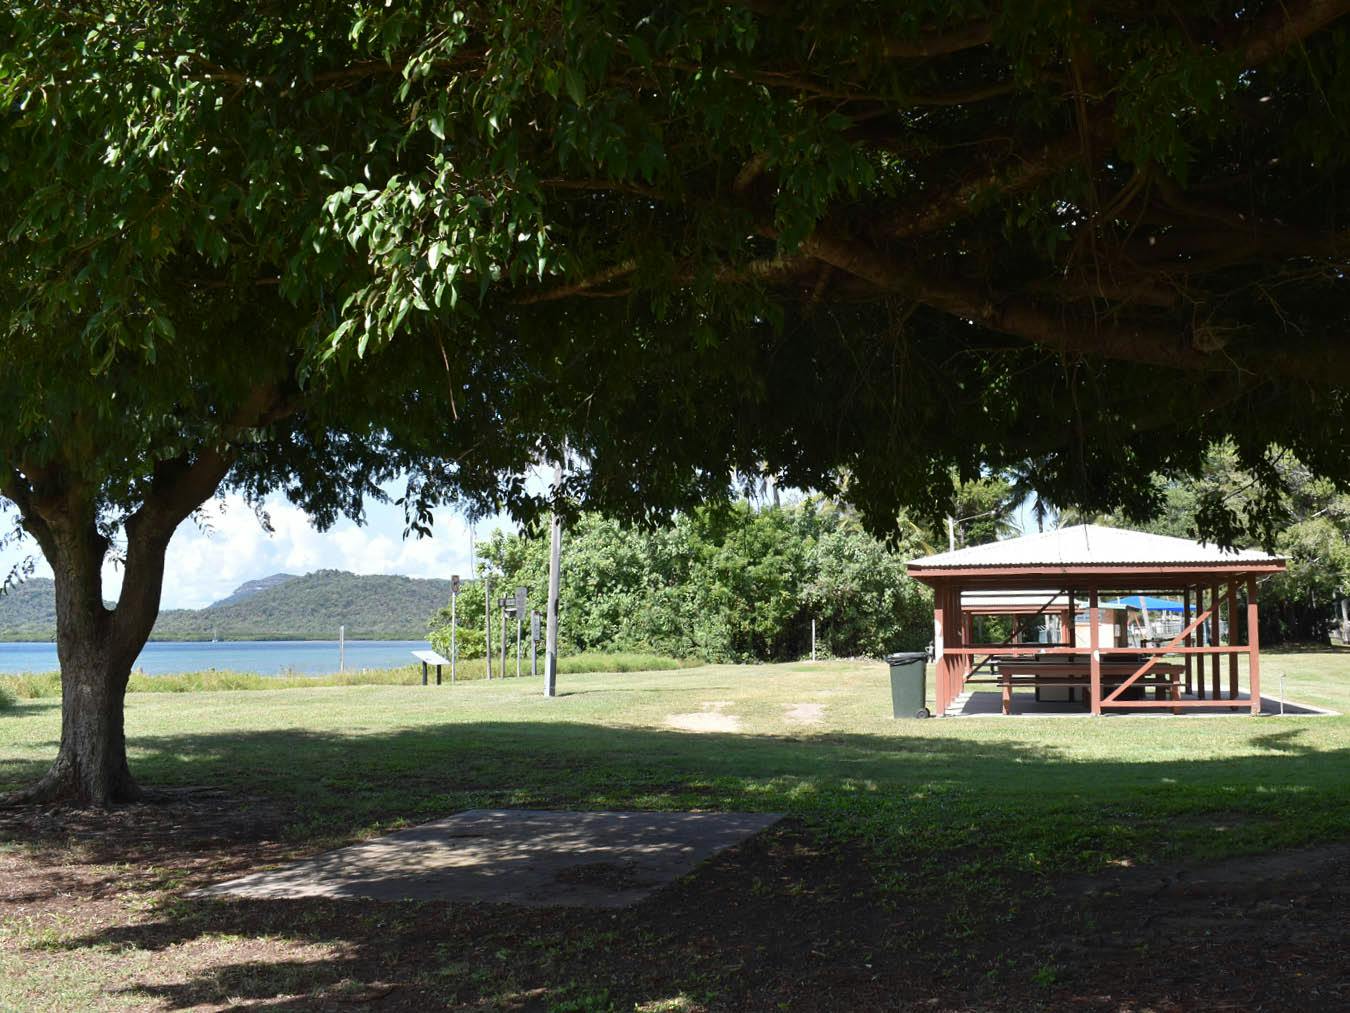 This picnic area is opposite the sign. The photograph looking east towards a picnic shelter.